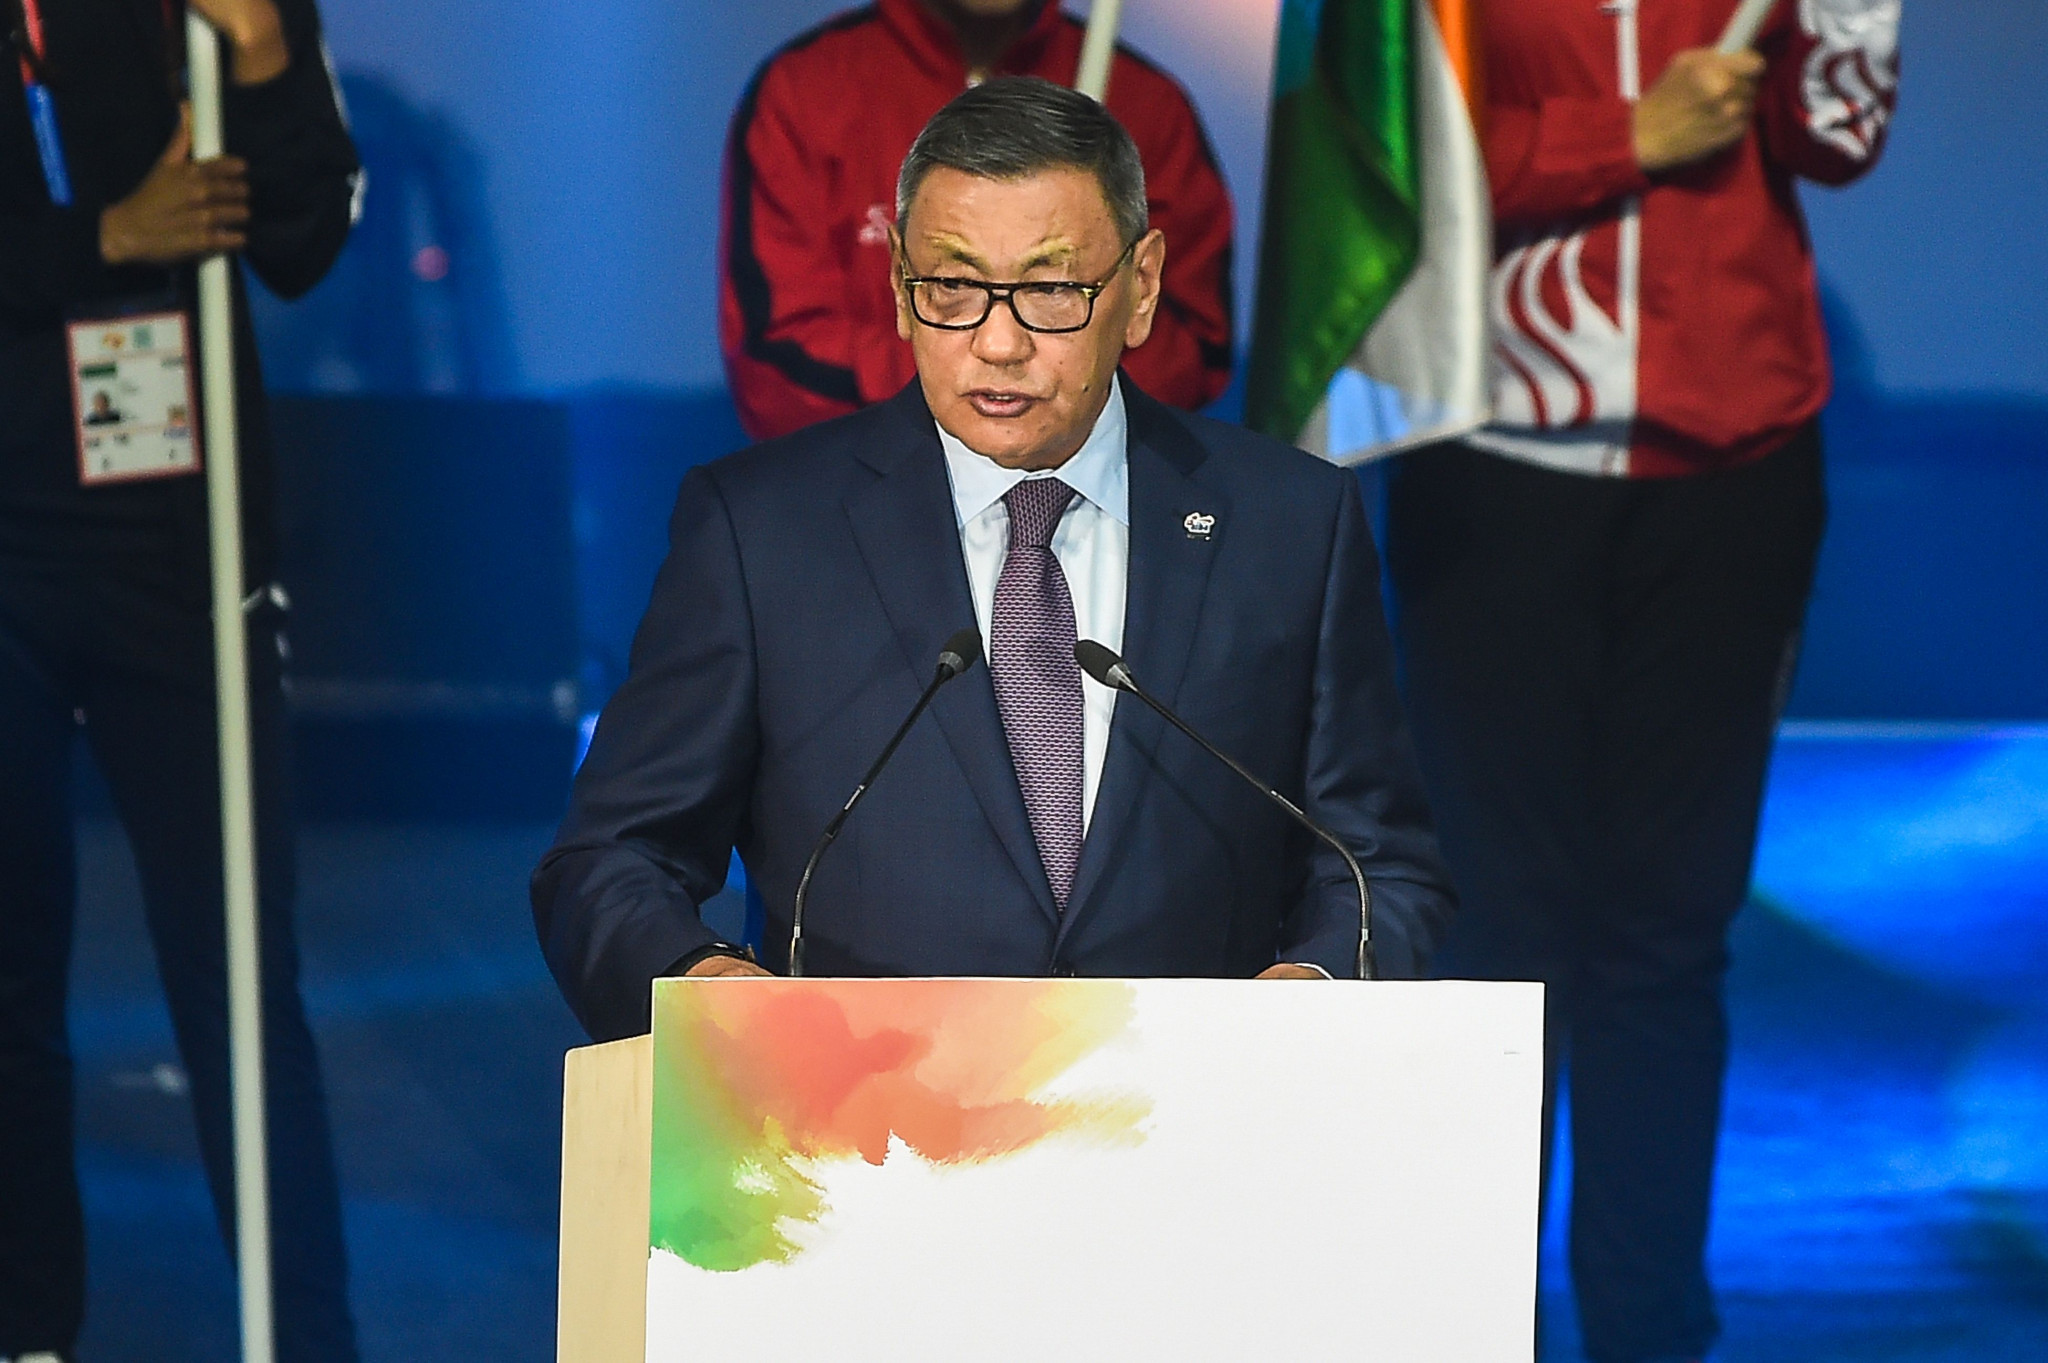 Controversial AIBA President Gafur Rakhimov wants to meet the IOC's Inquiry Committee in early January ©Getty Images